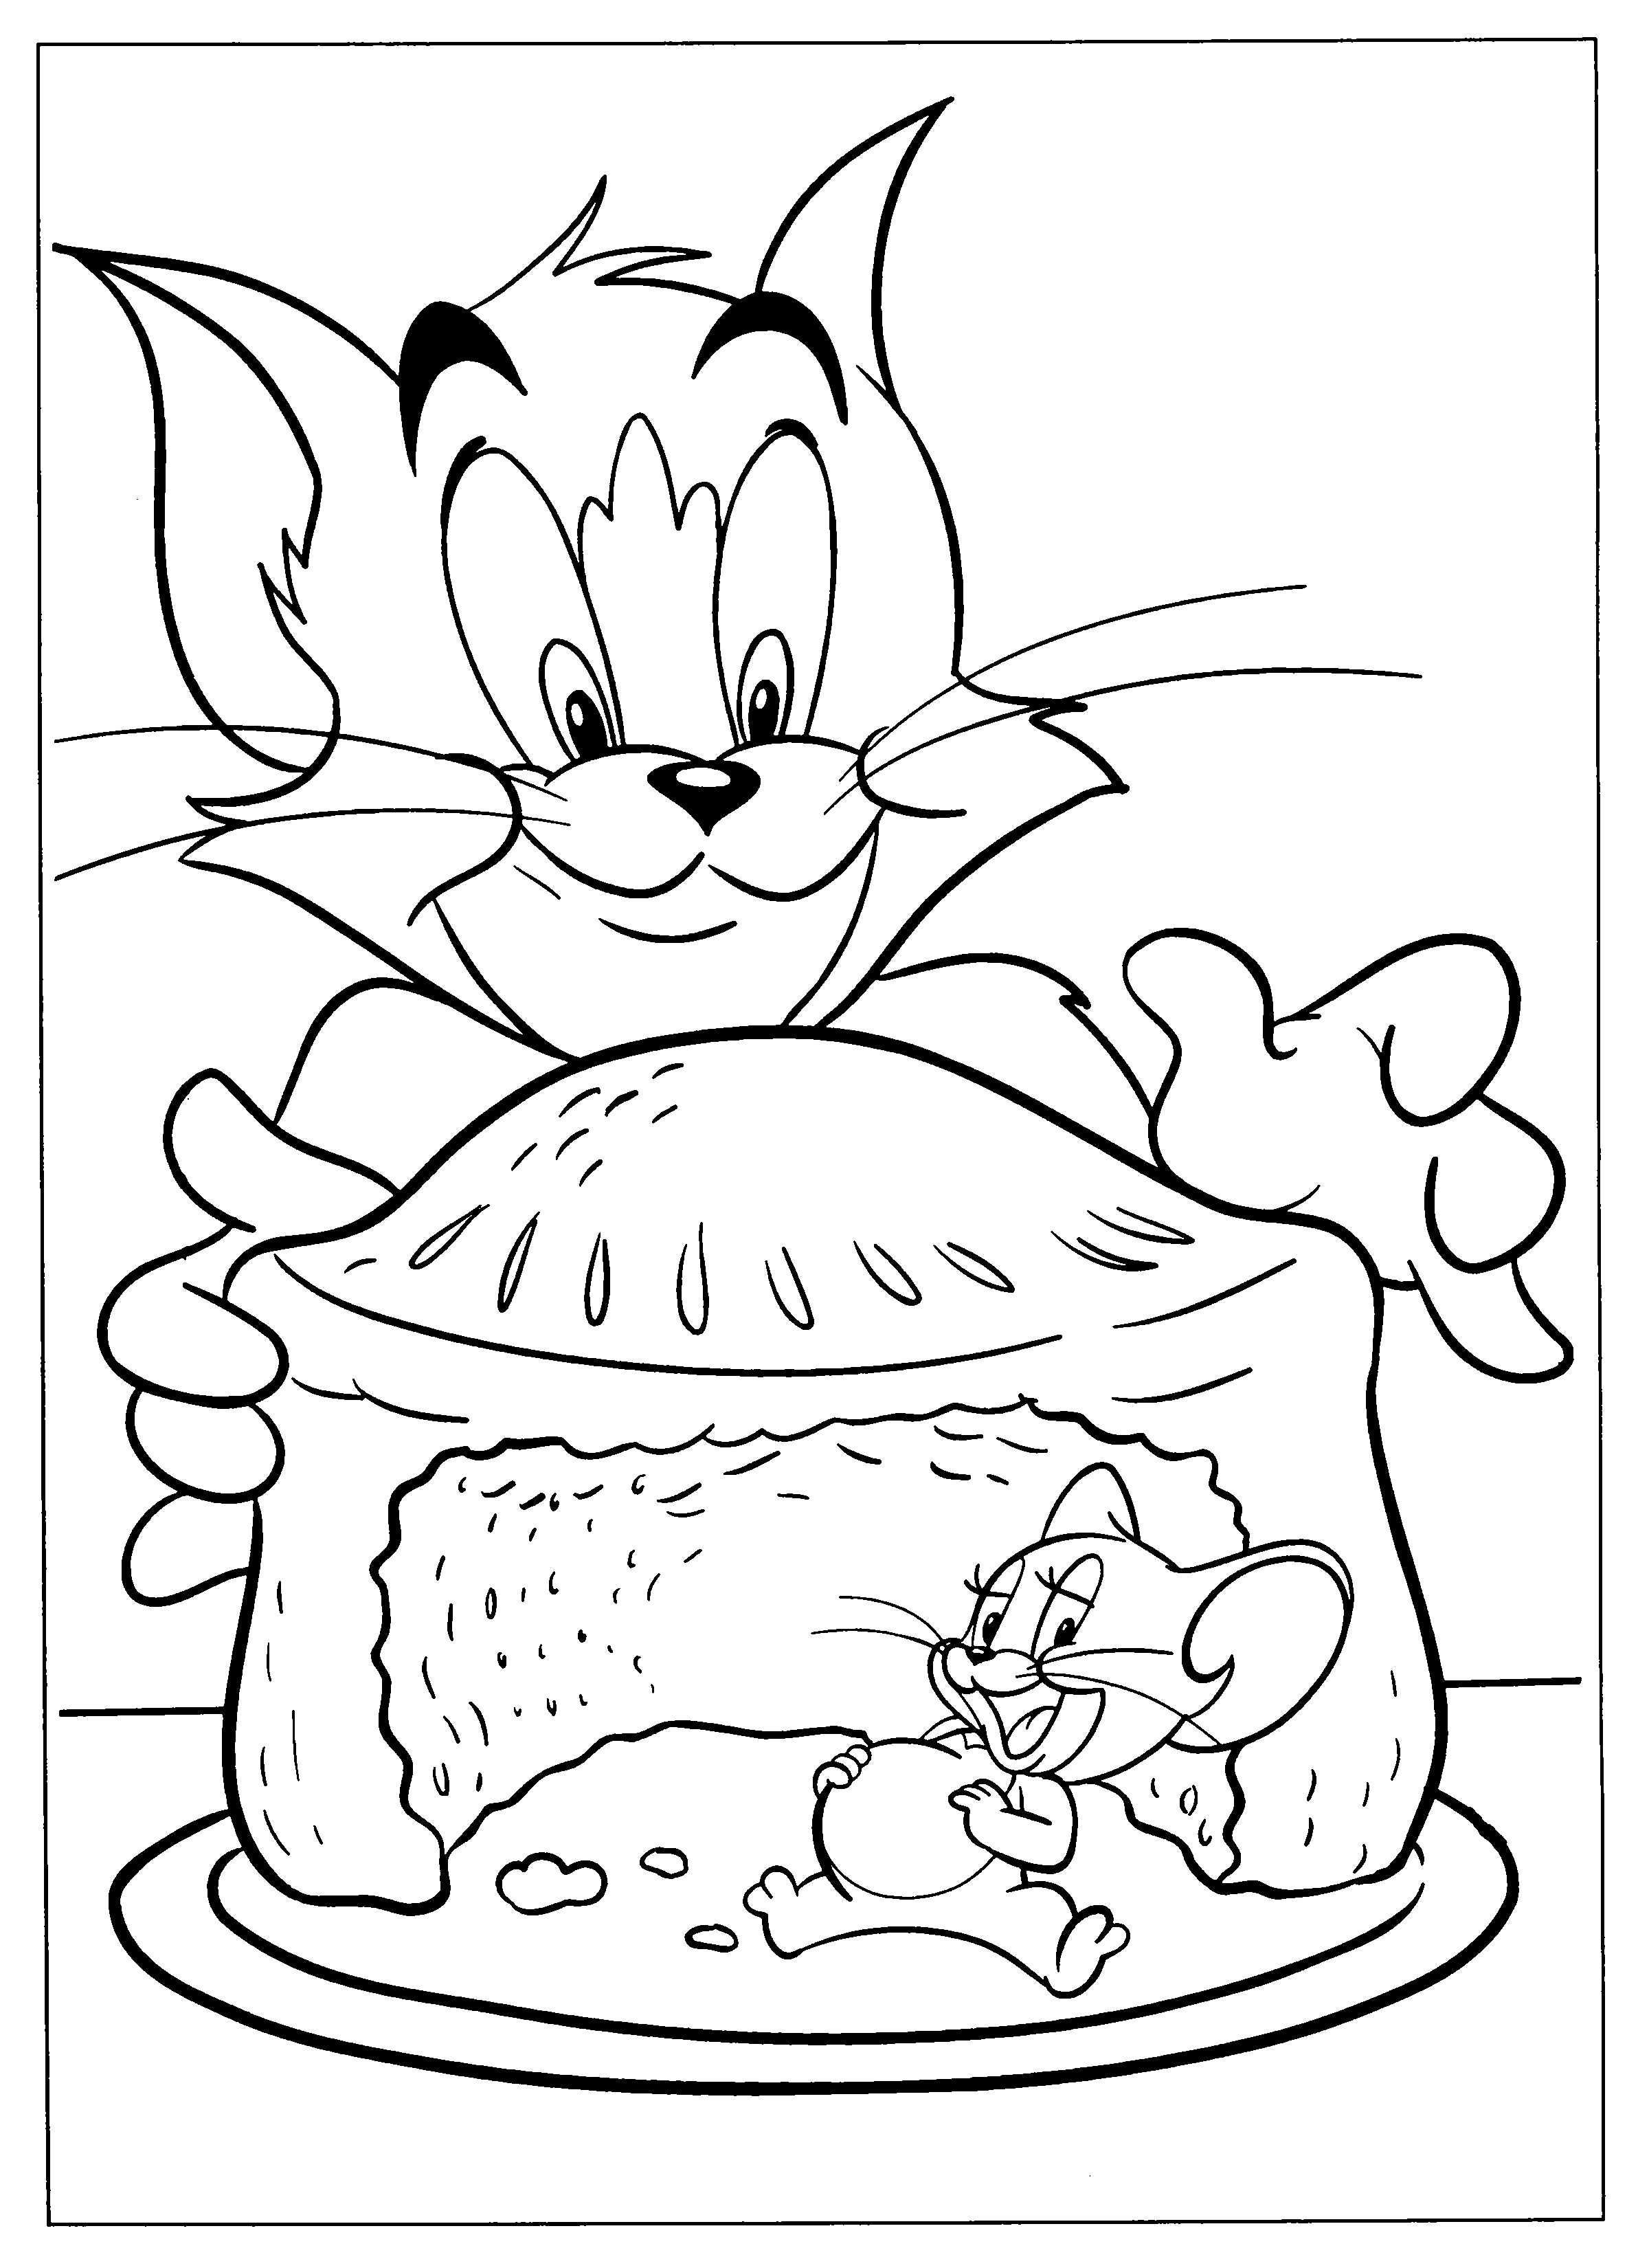 Happy Tom and Jerry Coloring Page - SheetalColor.com